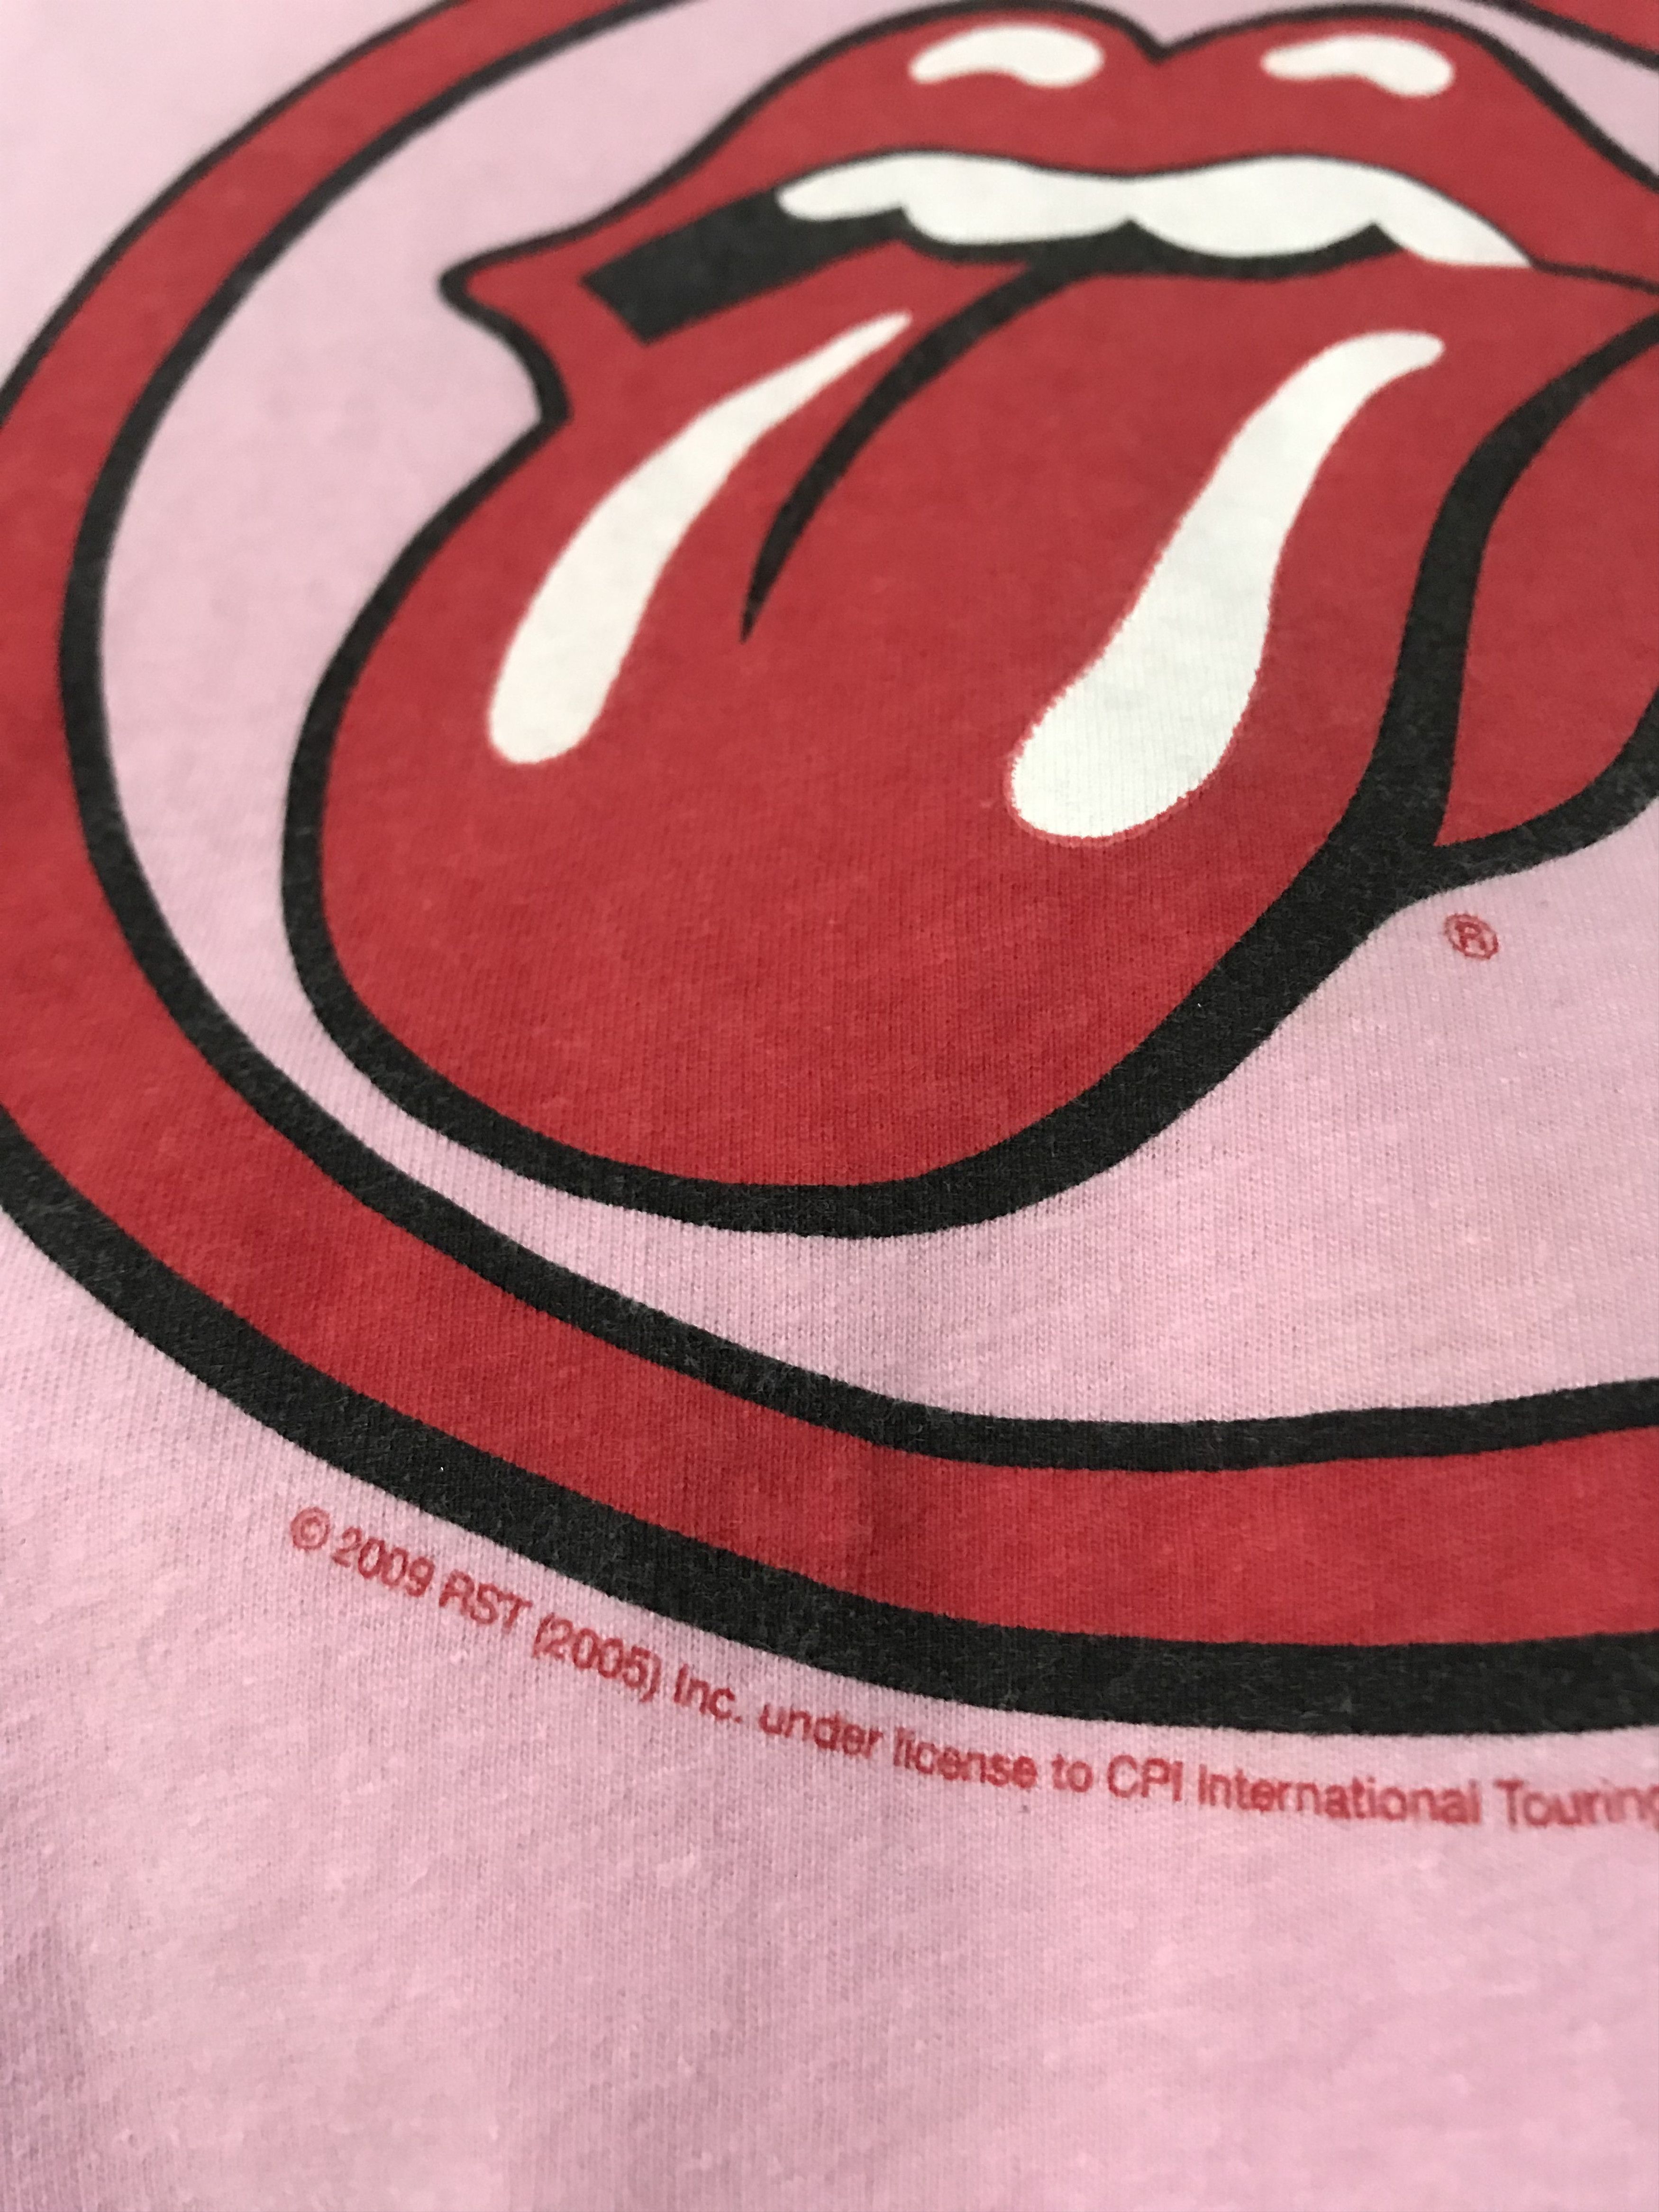 The Rolling Stones Rare The rolling Stones X japanese market pink t shirt Size US L / EU 52-54 / 3 - 7 Preview